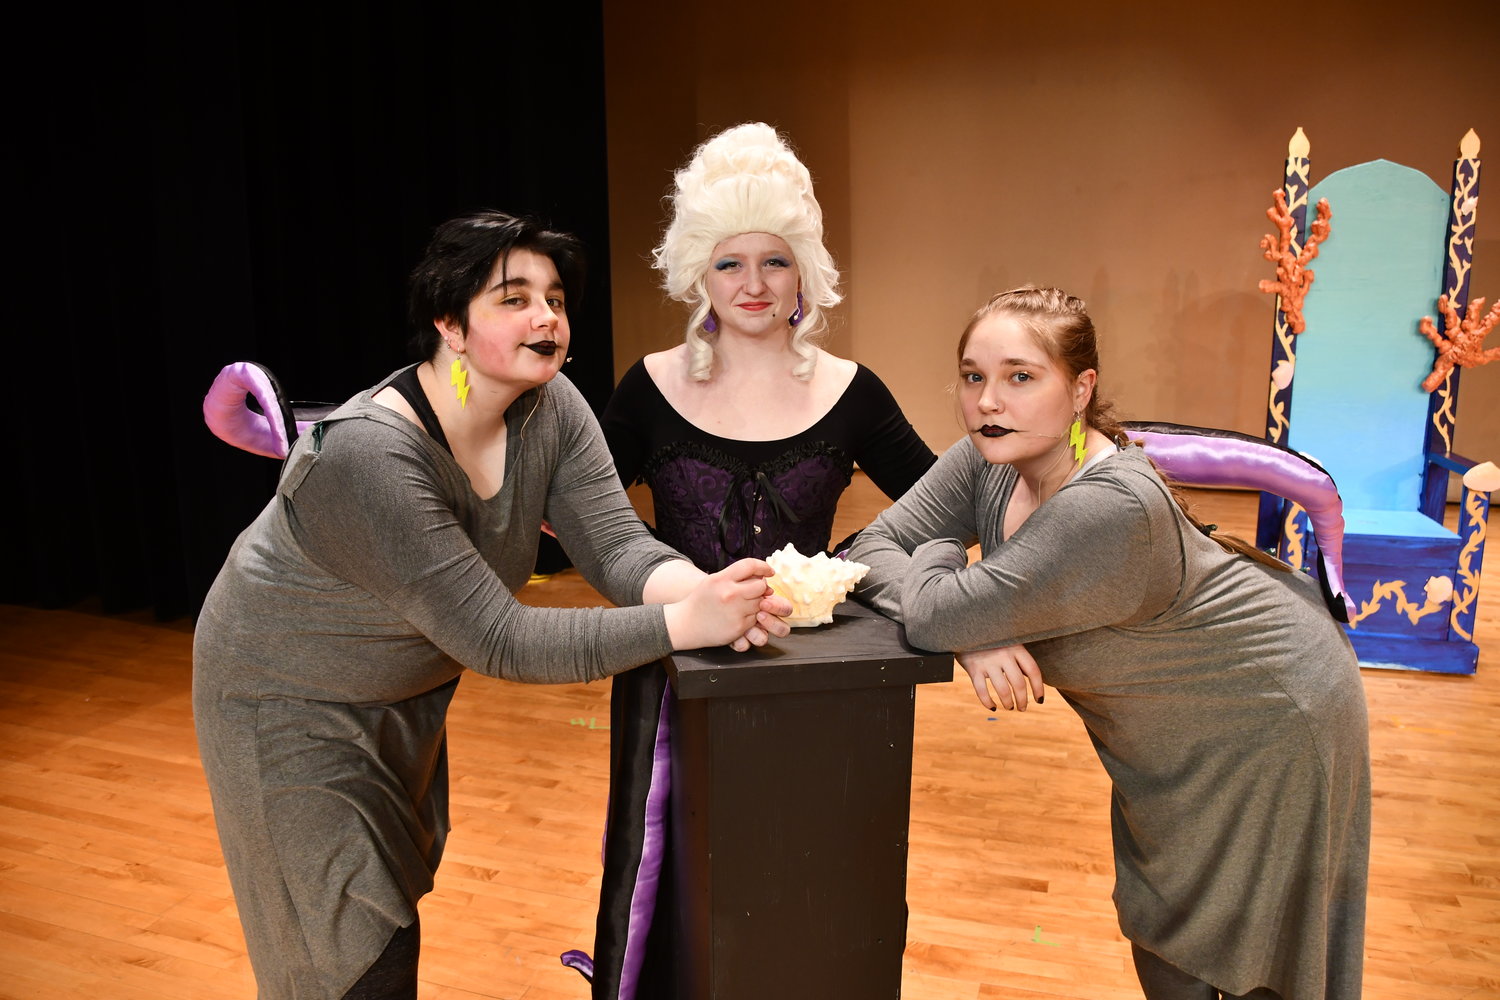 From the left: Jetsam played by Aden Volpe, Ursula played by Cheyenne Decker and Flotsam played by Lucy Arzilla.